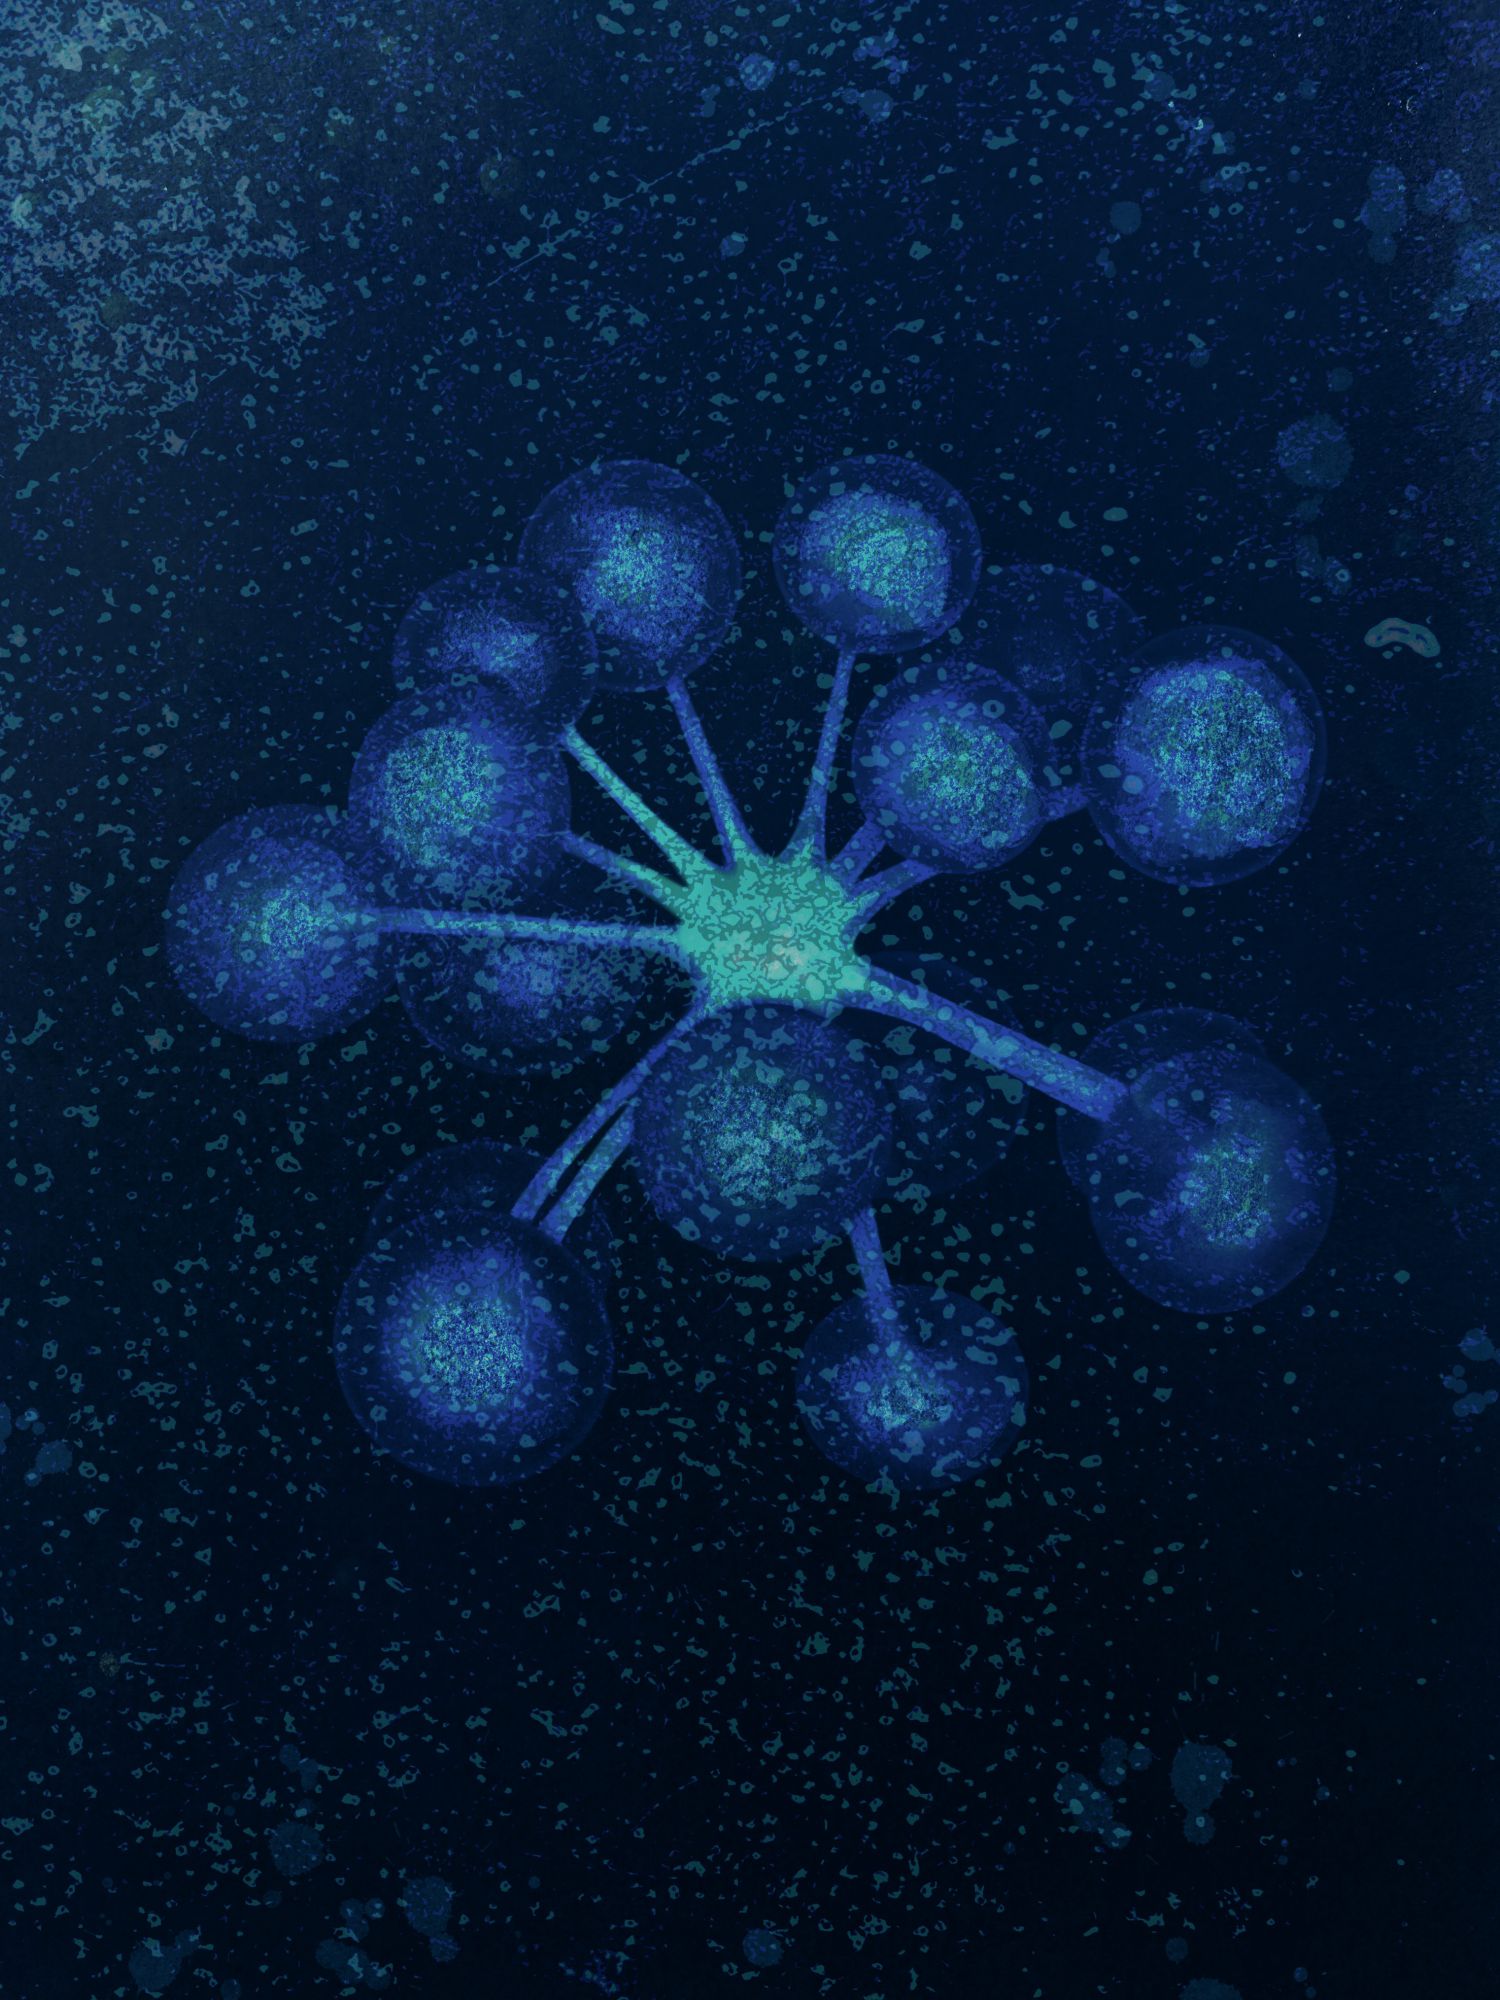 A cyanotype squid-like creature with light reflections on its sophisticated skin. Creature extends diagonally through the image on a mysterious dark background.